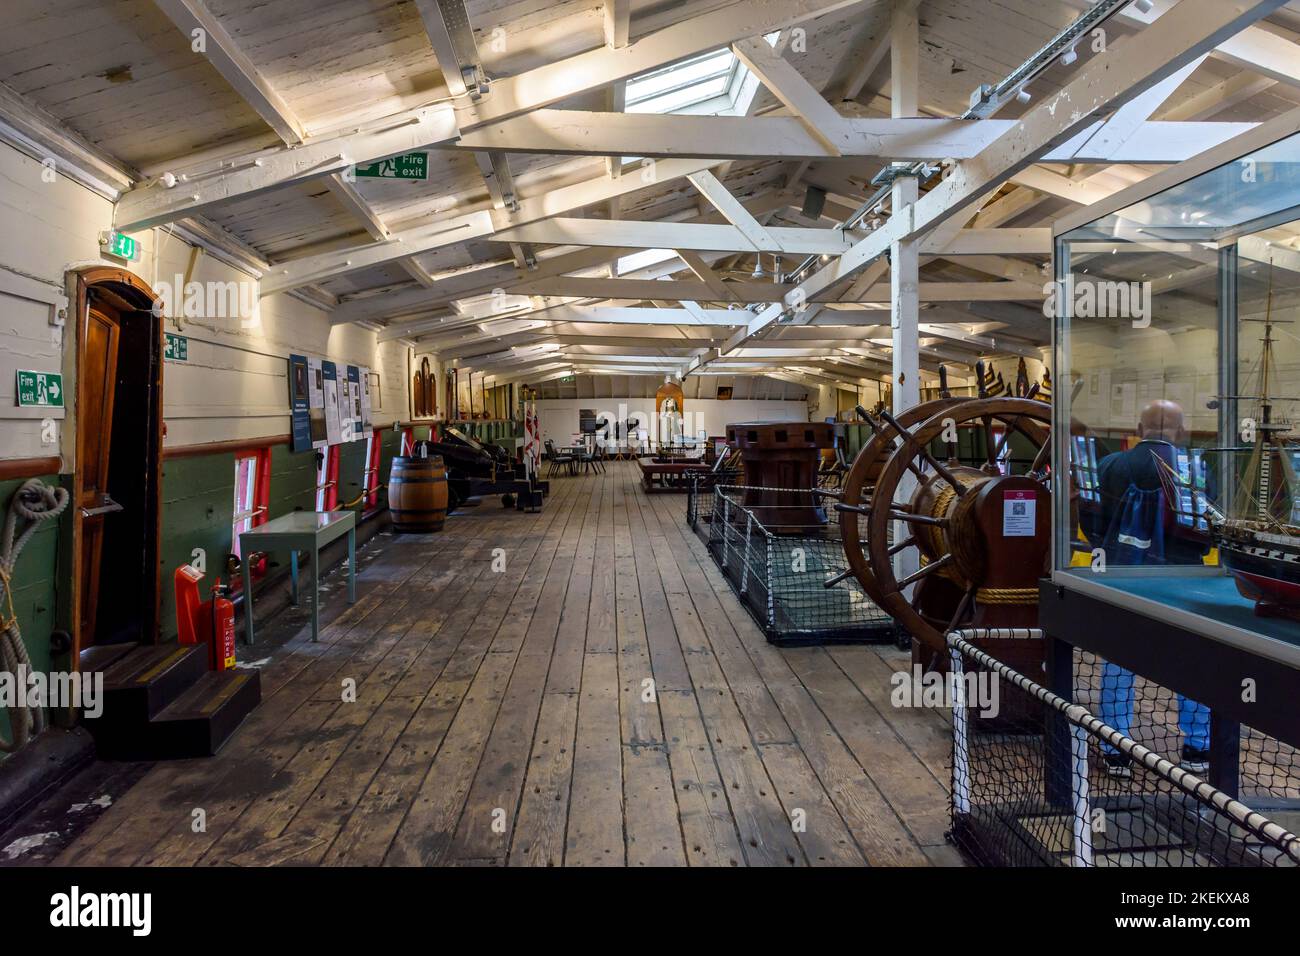 The upper deck of the frigate HMS Unicorn.  Built for the Royal Navy and launched in 1824.  West Victoria Dock, Dundee, Scotland, UK Stock Photo